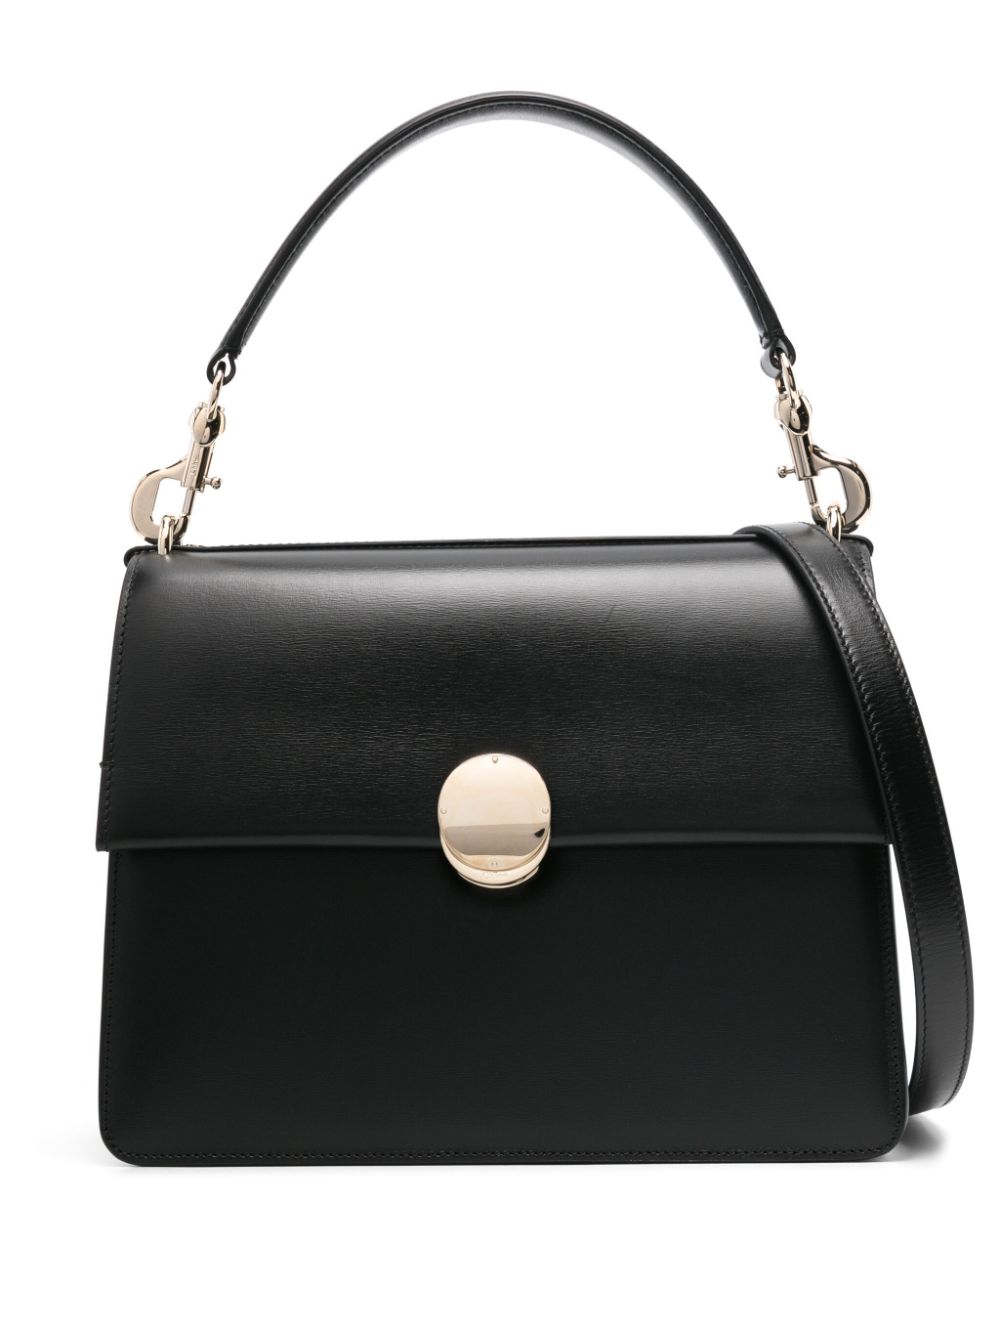 Grained Leather Foldover Handbag with Detachable Strap